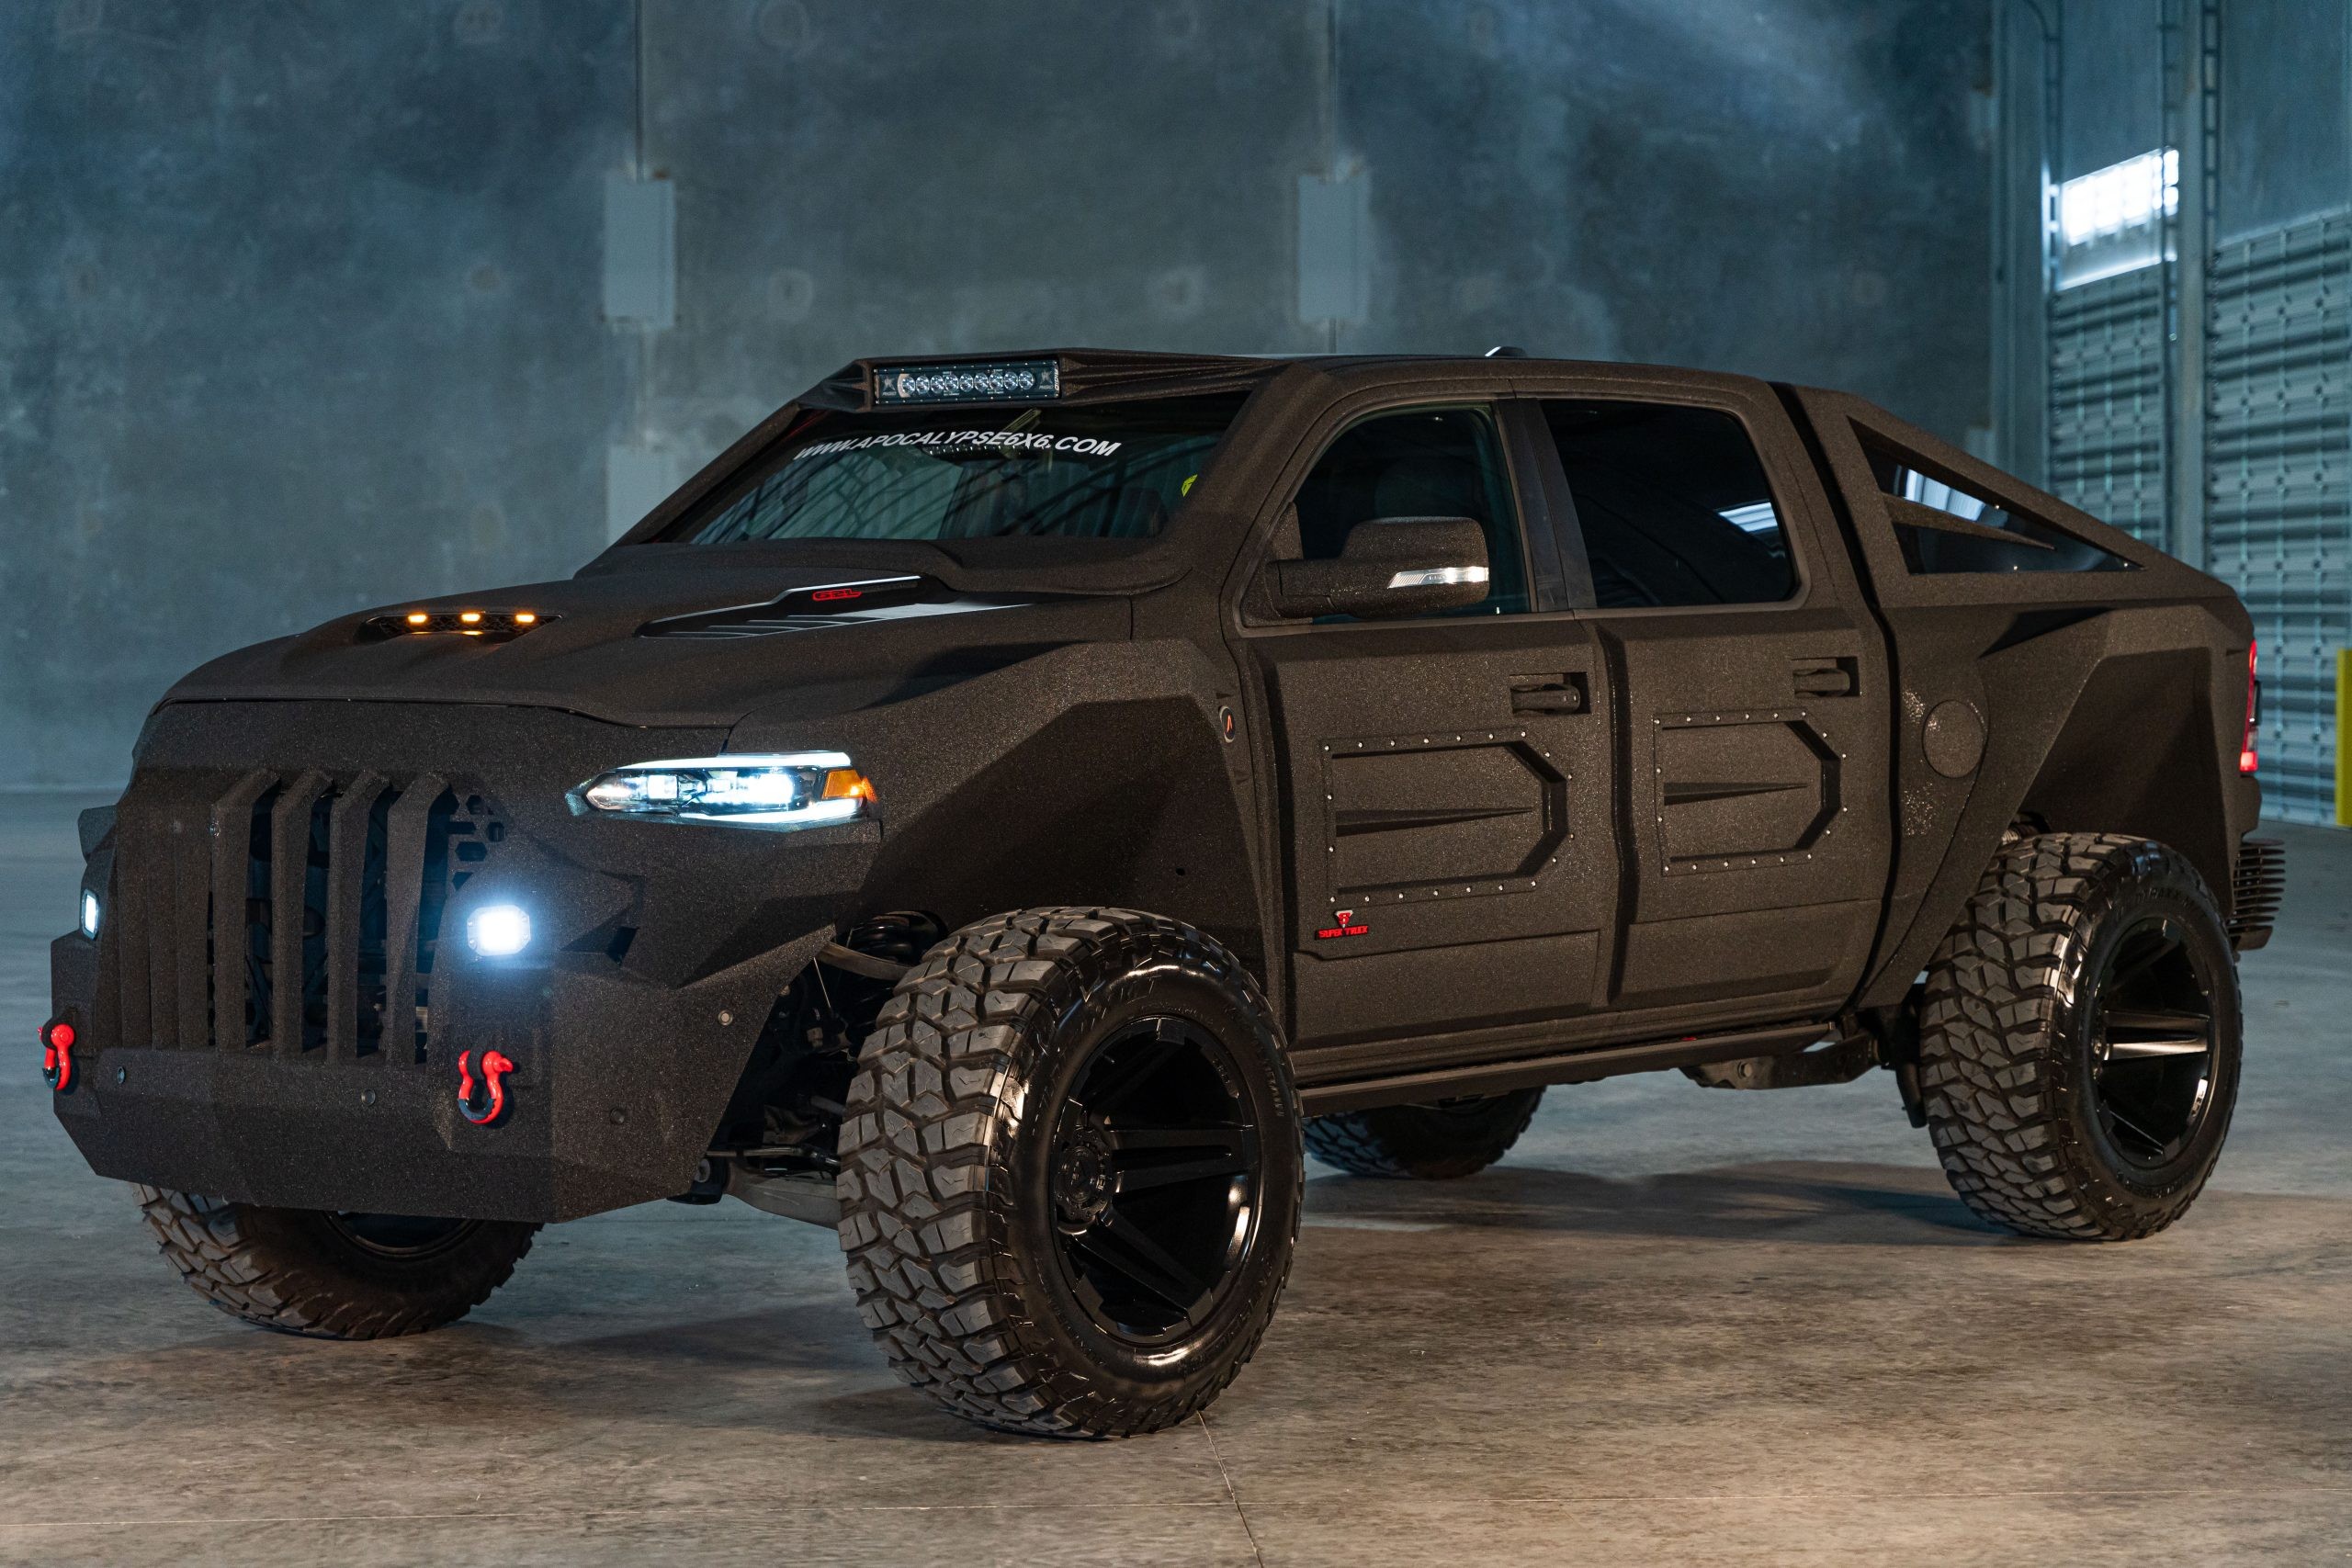 This Apocalypse-Ready Super Truck Ram 1500 TRX Strikes Fear into the Hearts of Pedestrians